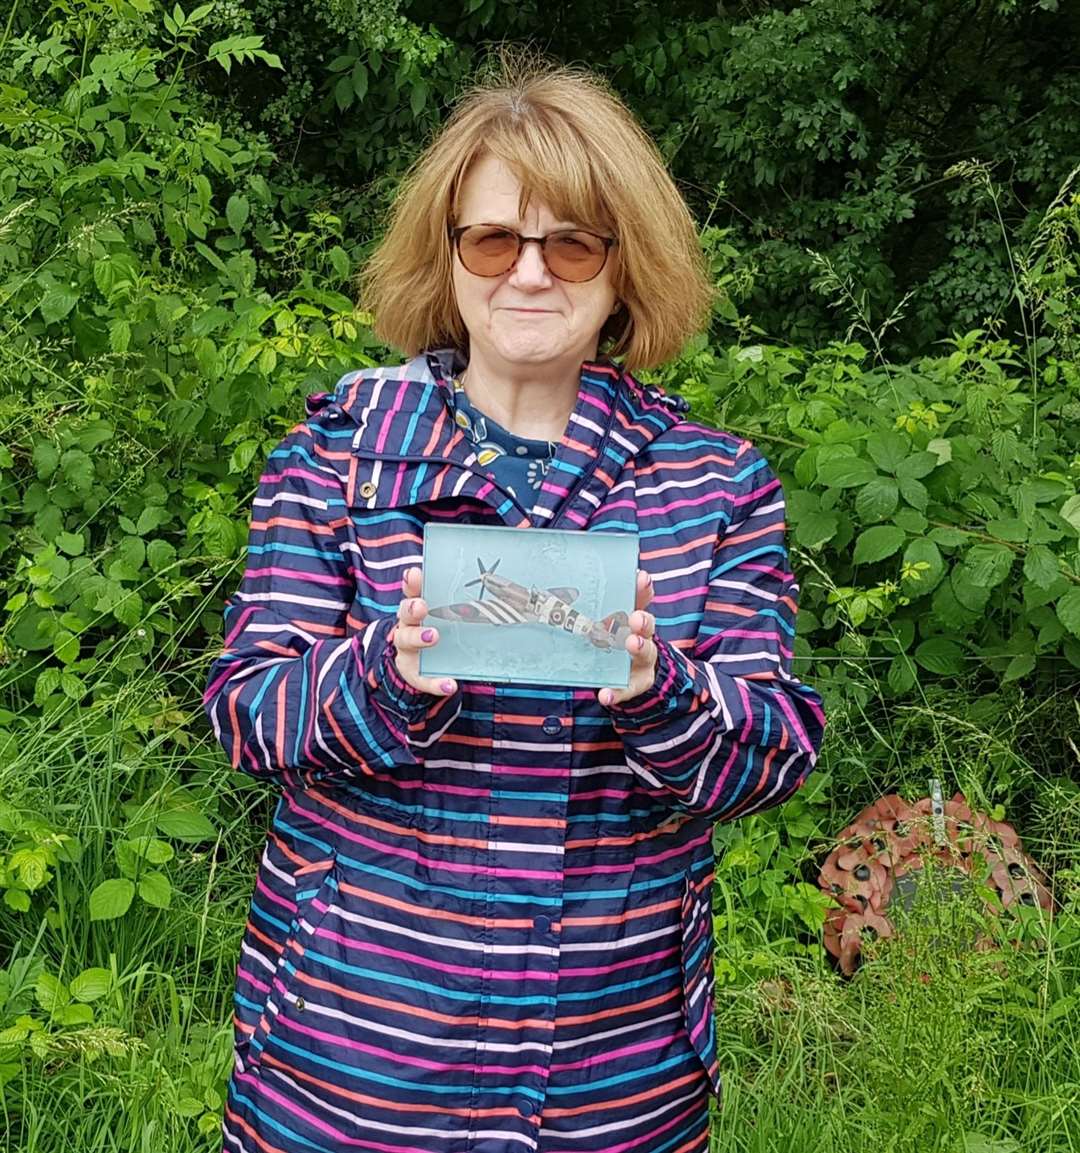 Cllr Jackie Bennett holding a piece of memorabilia which has been left at the memorial for Mr Blumer in Nettlestead Green